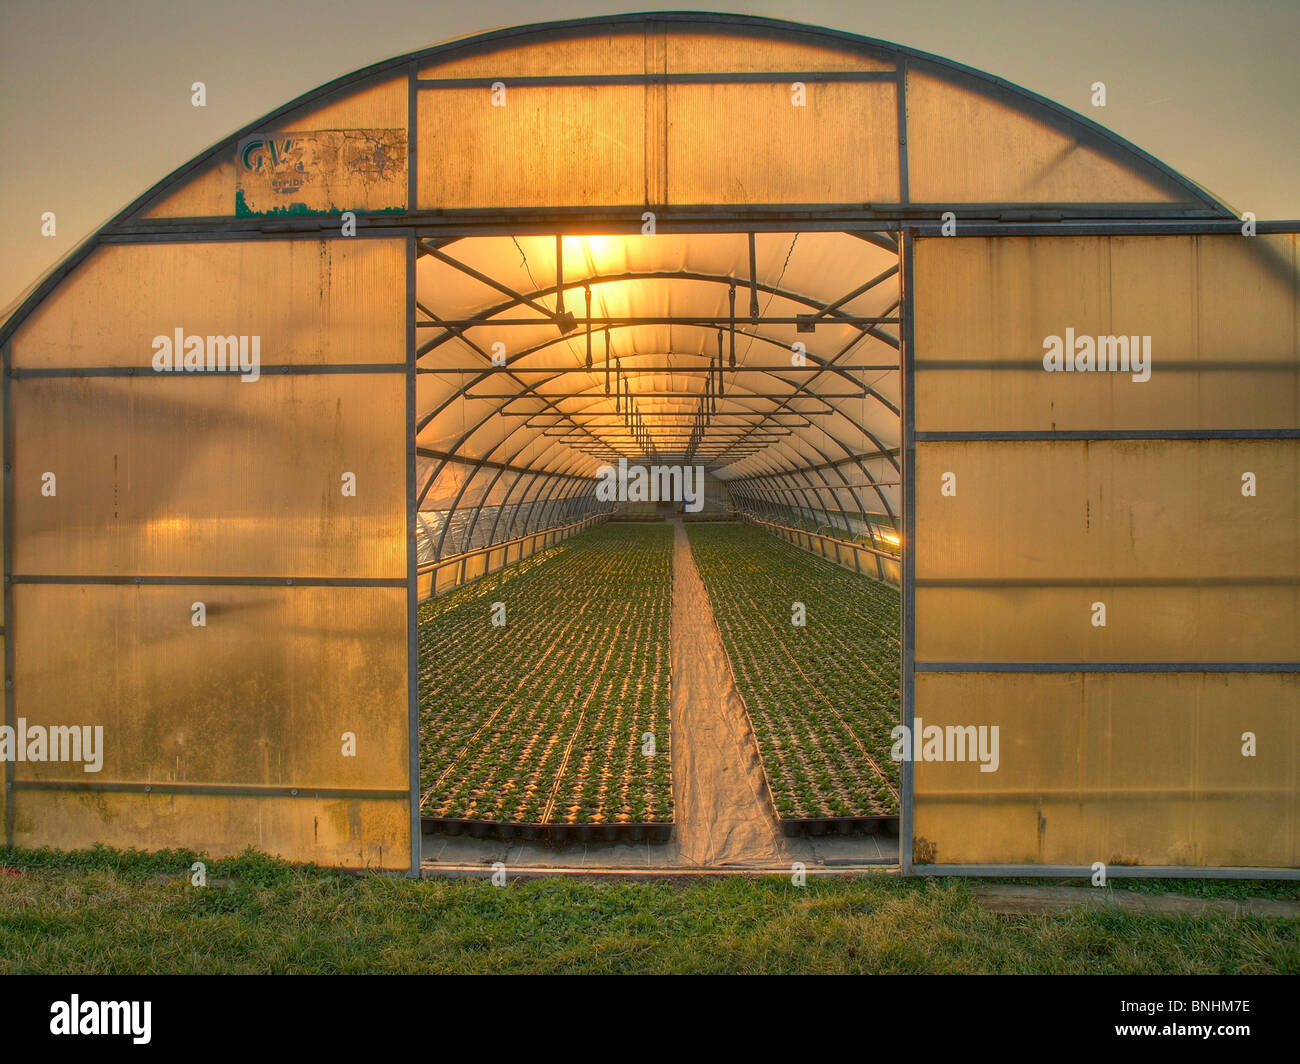 Switzerland greenhouse green house indoors inside plants cultivation agriculture sun sunset sunrise Stock Photo